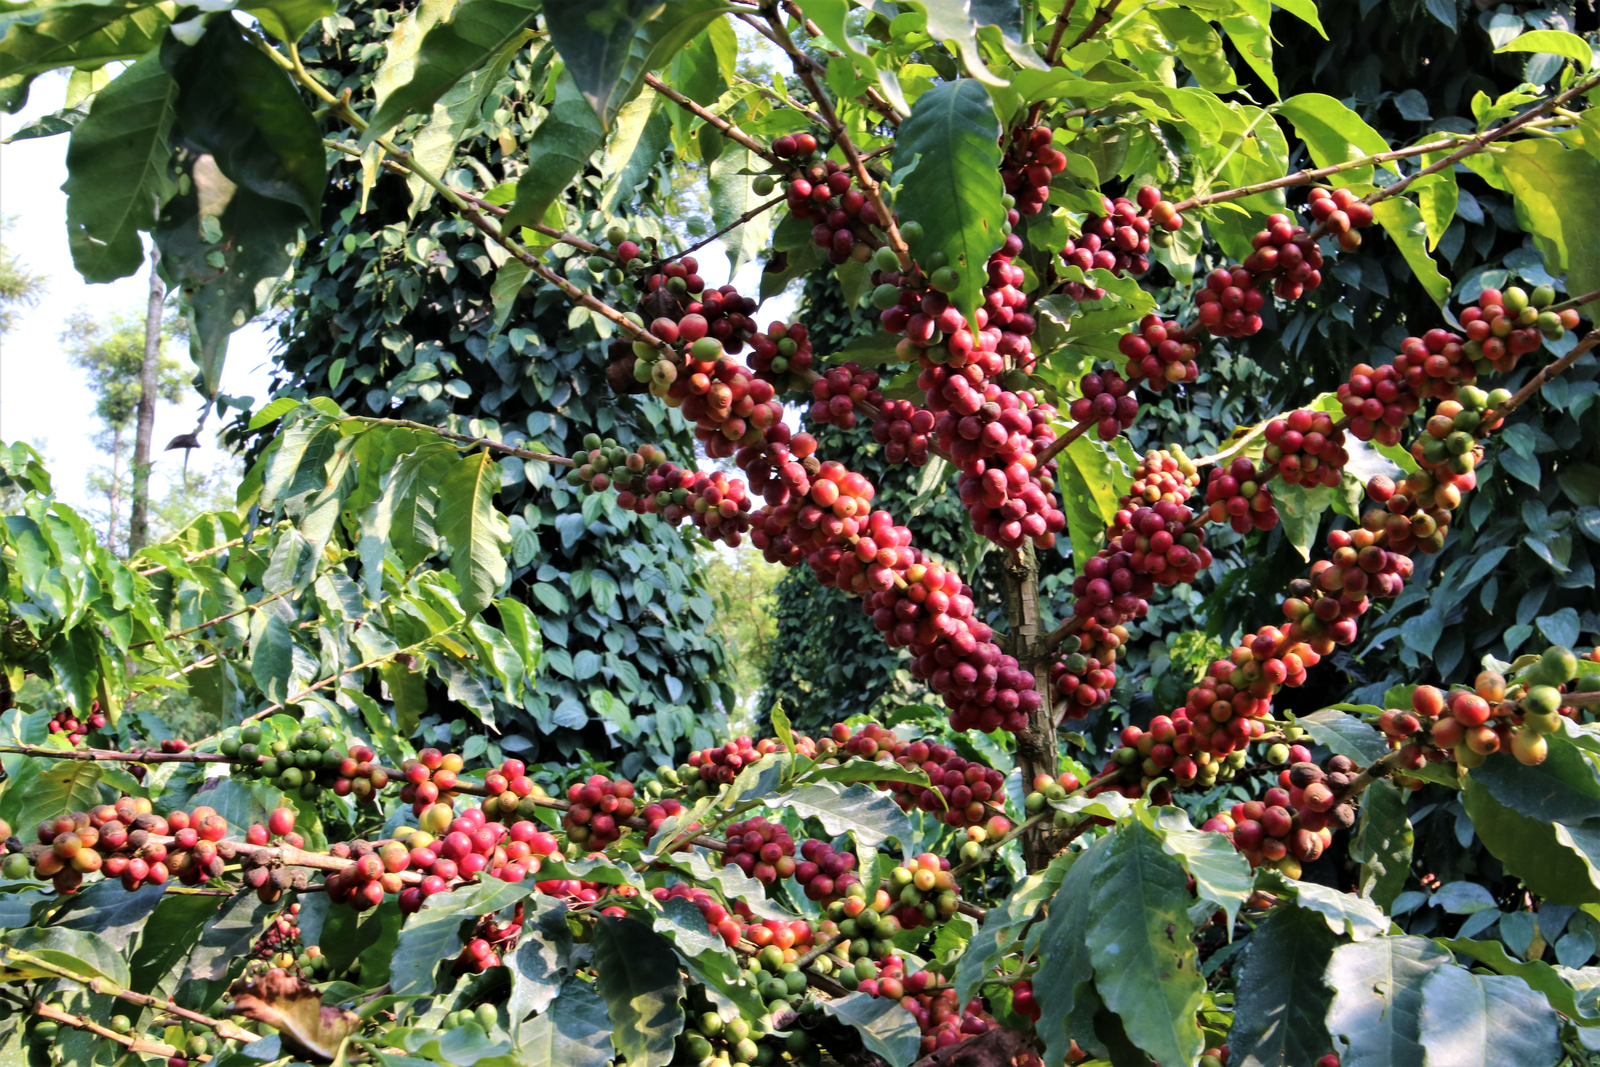 Why should Indian Coffee Producers go for Drip Irrigation?